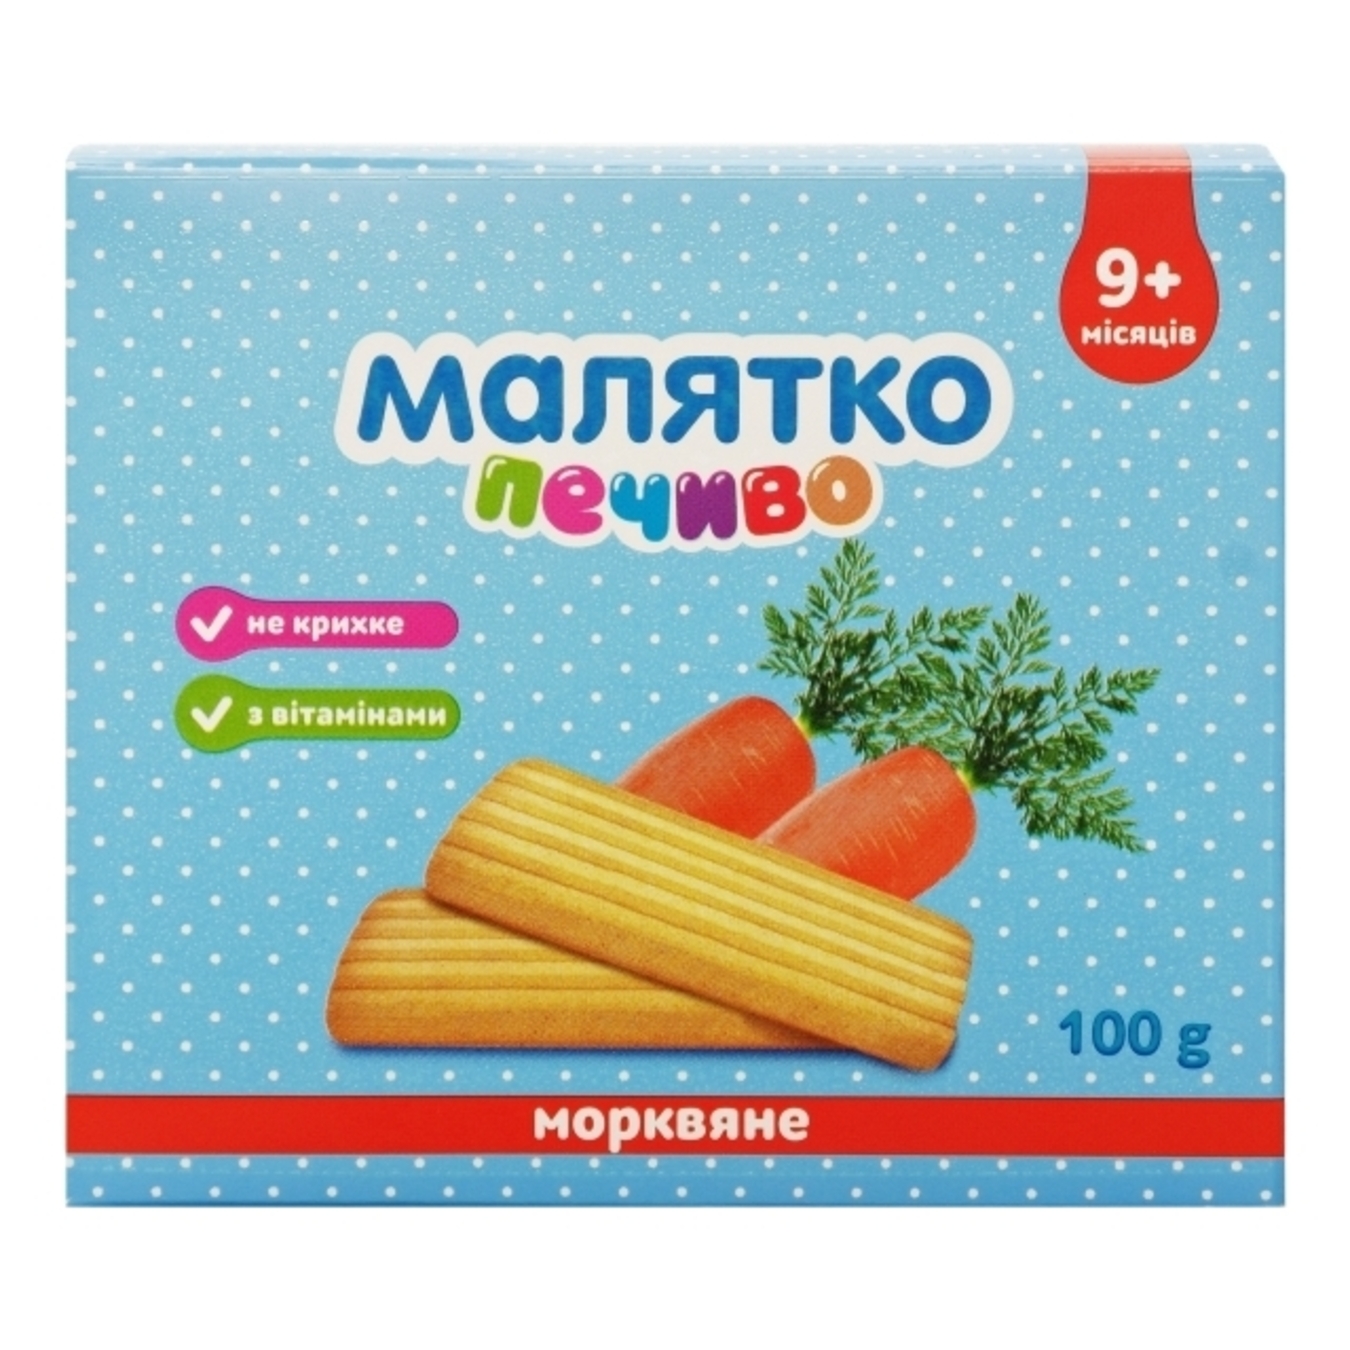 Malyatko for children from 9 months carrot cookies 100g